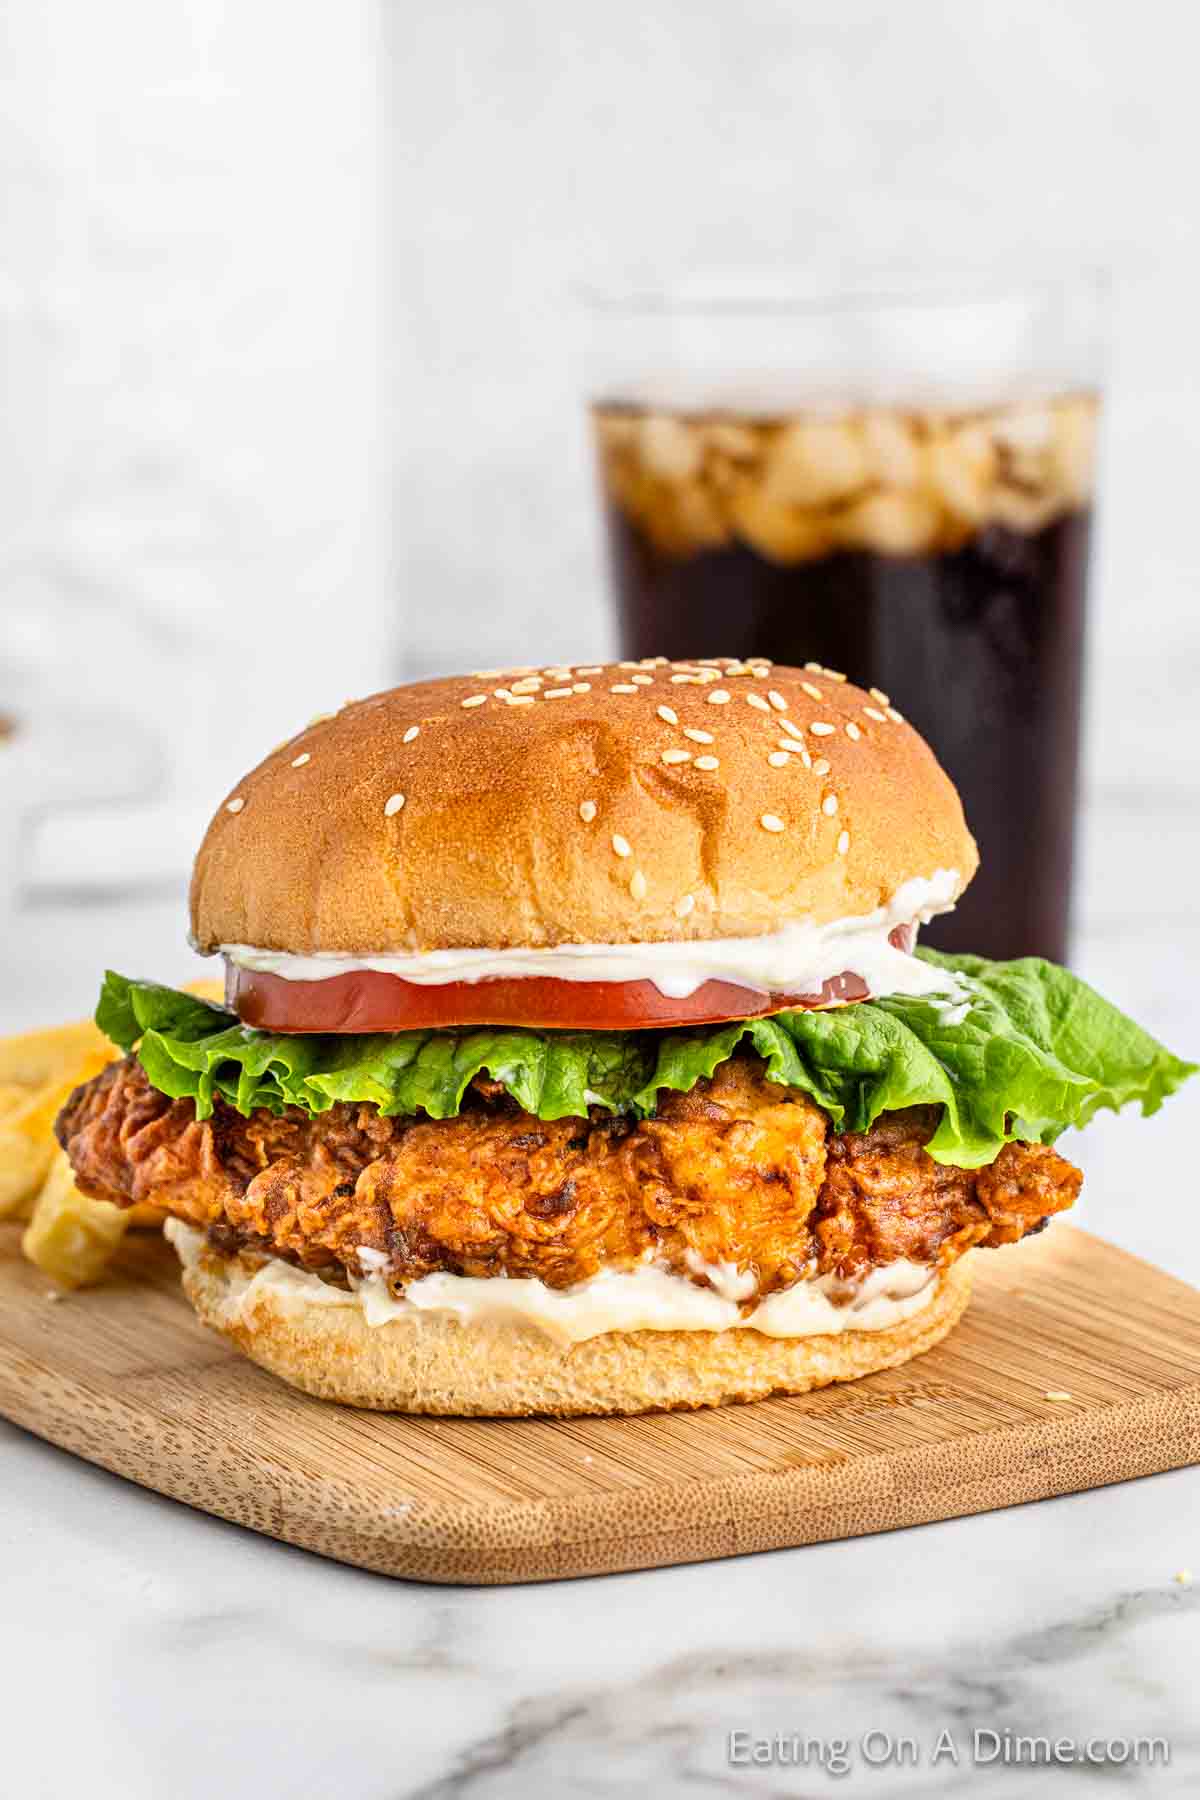 Crispy Chicken Sandwich topped with mayo, slice tomato, and lettuce with a sesame bun with a side of french fries and a glass of coca cola in the background